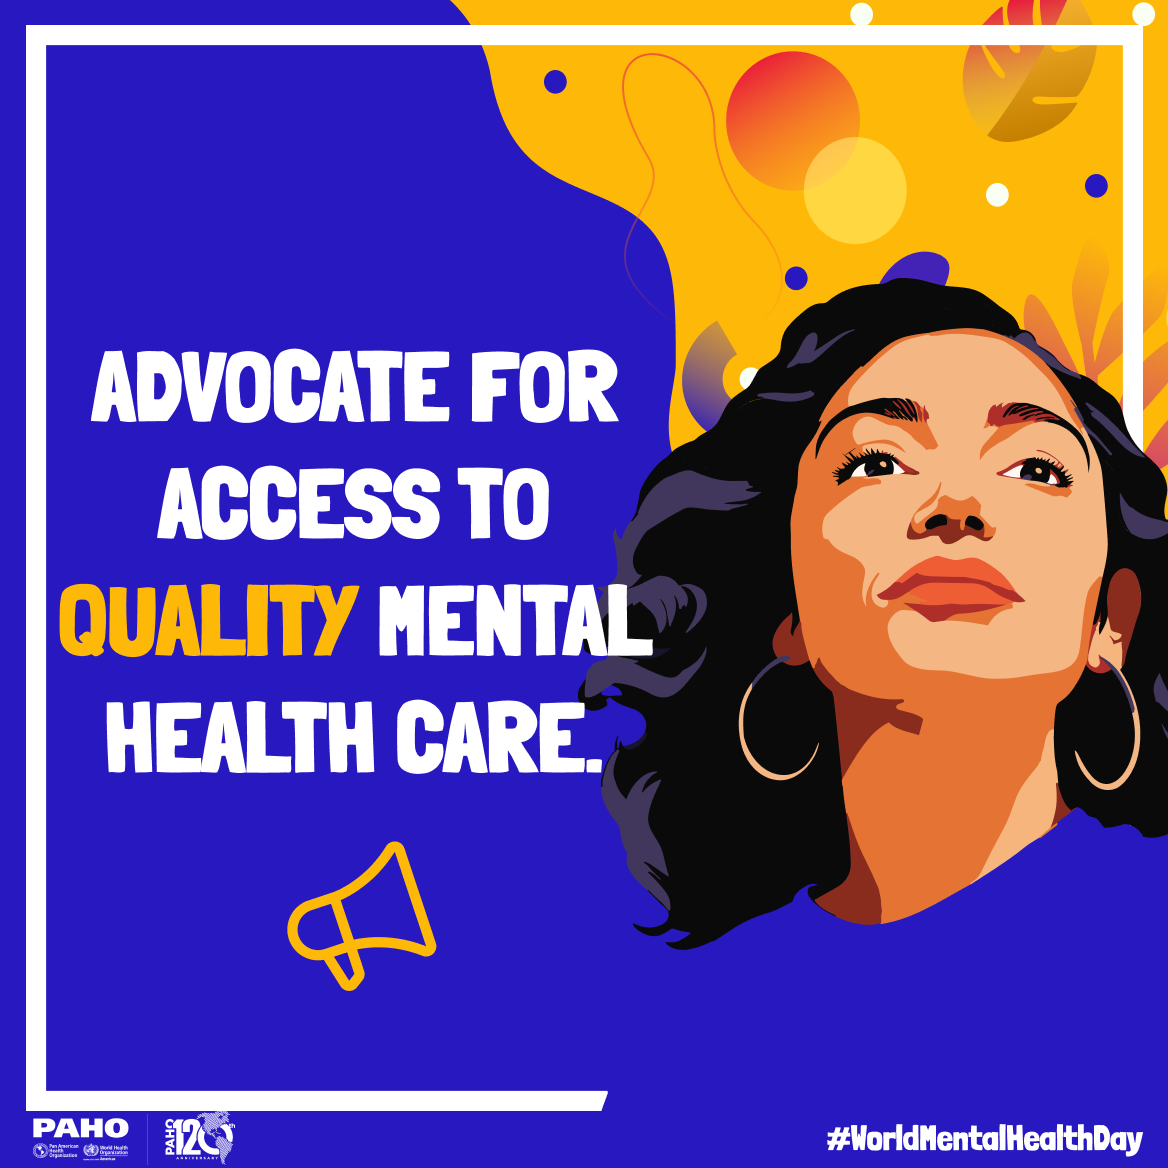 Advocate for access to quality mental health care.